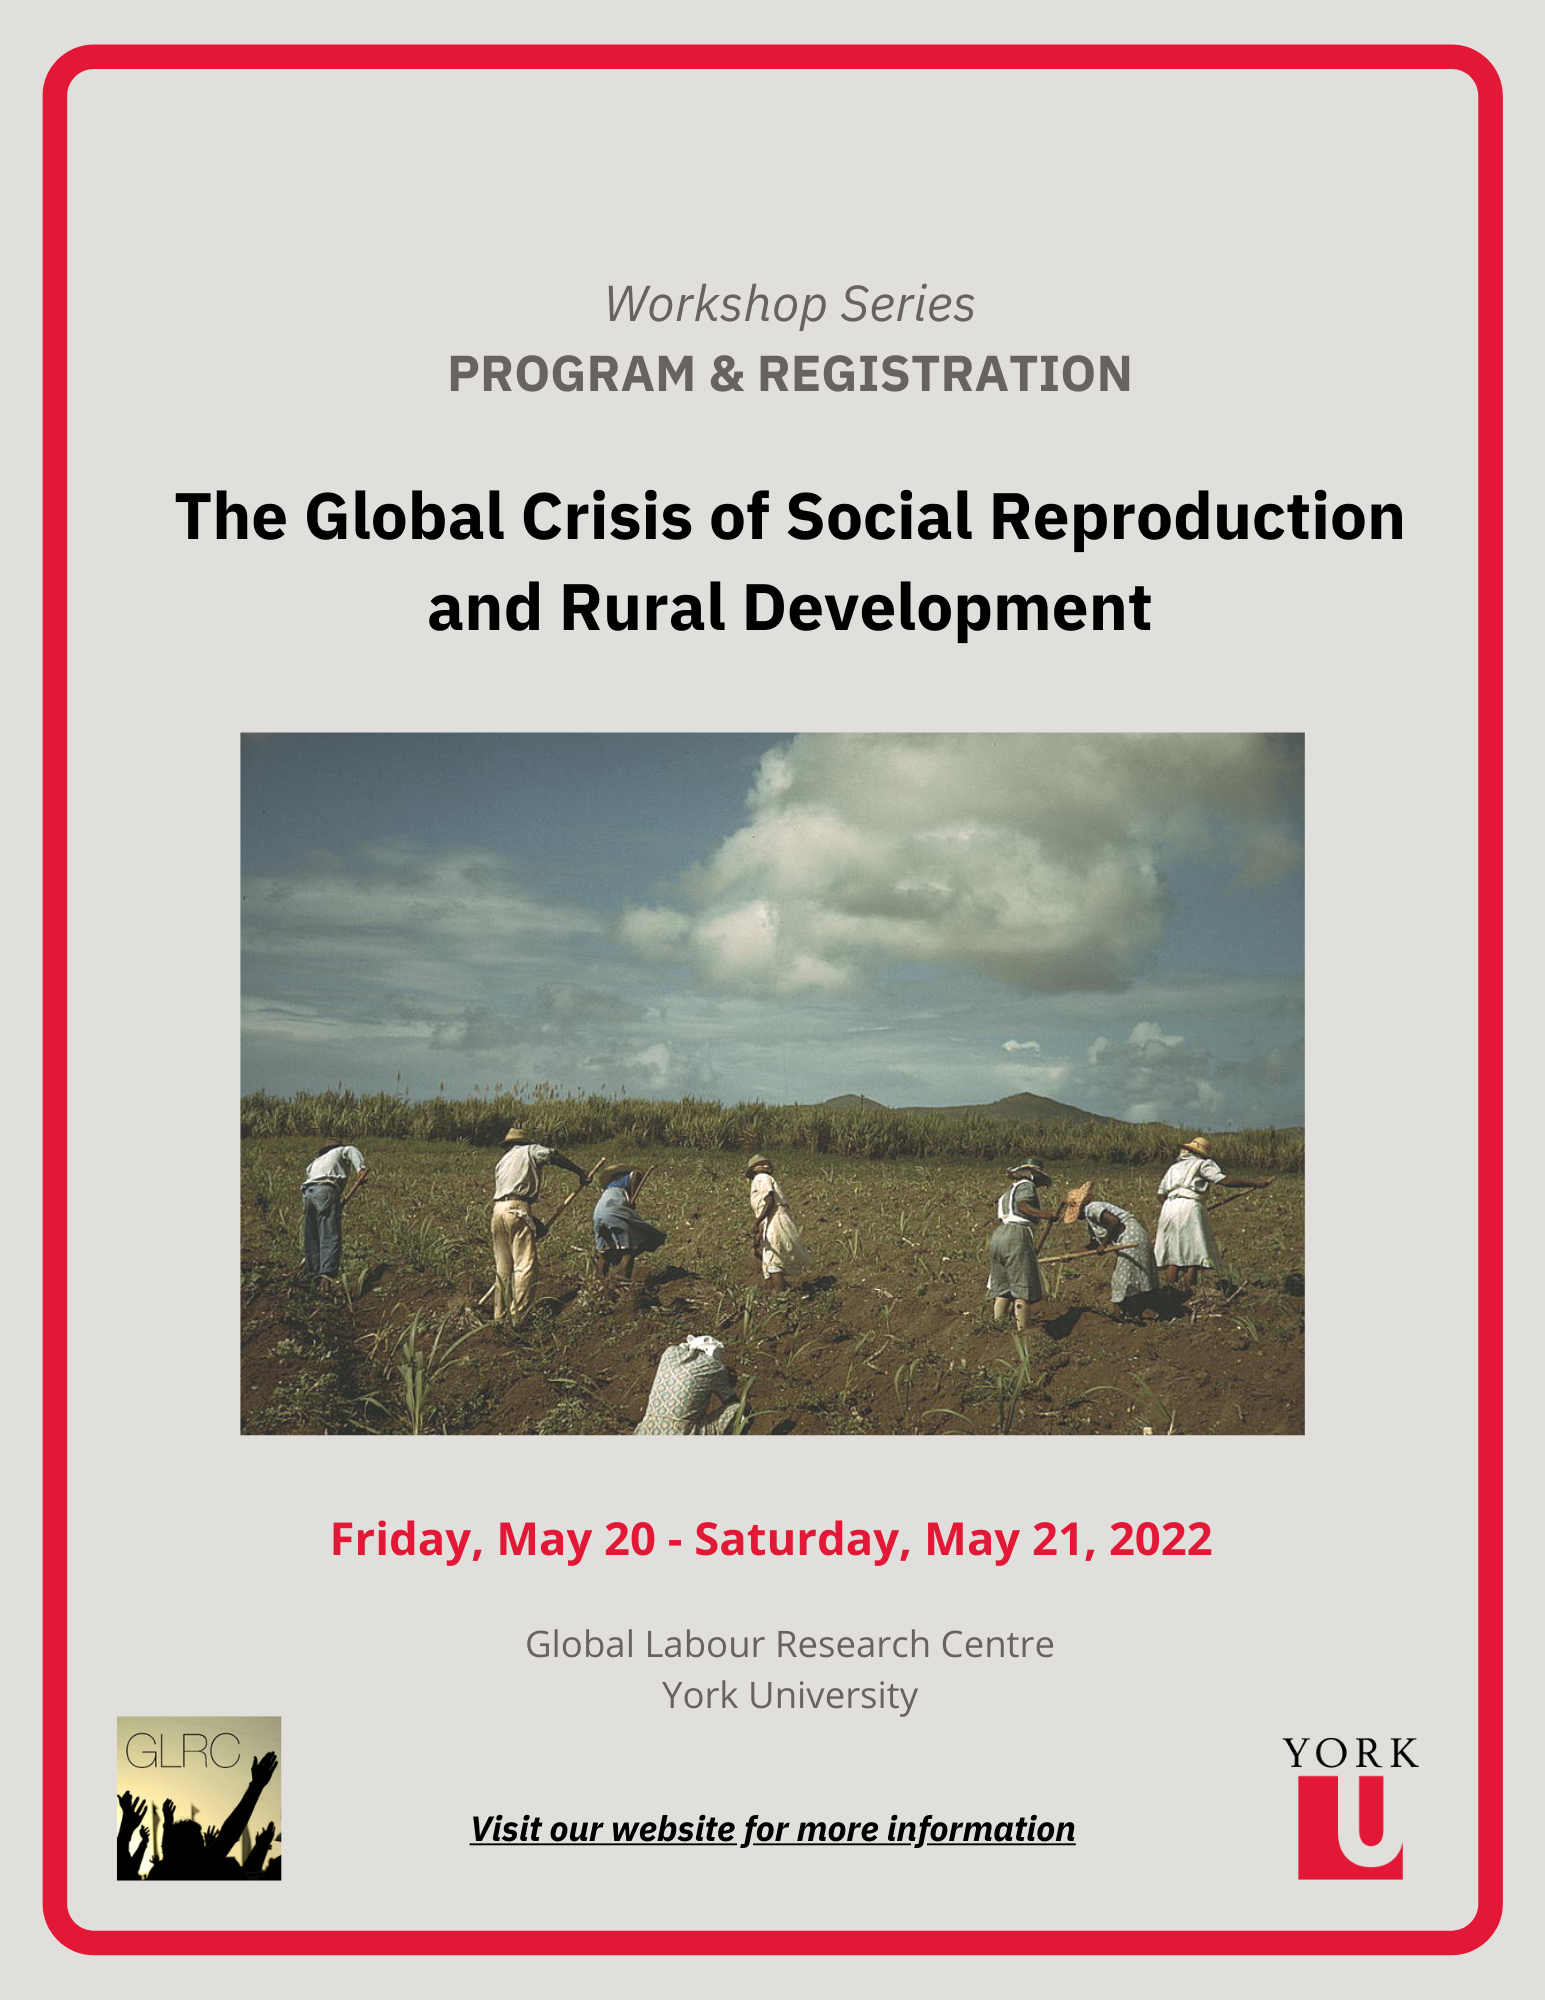 The Global Crisis of Social Reproduction and Rural Development